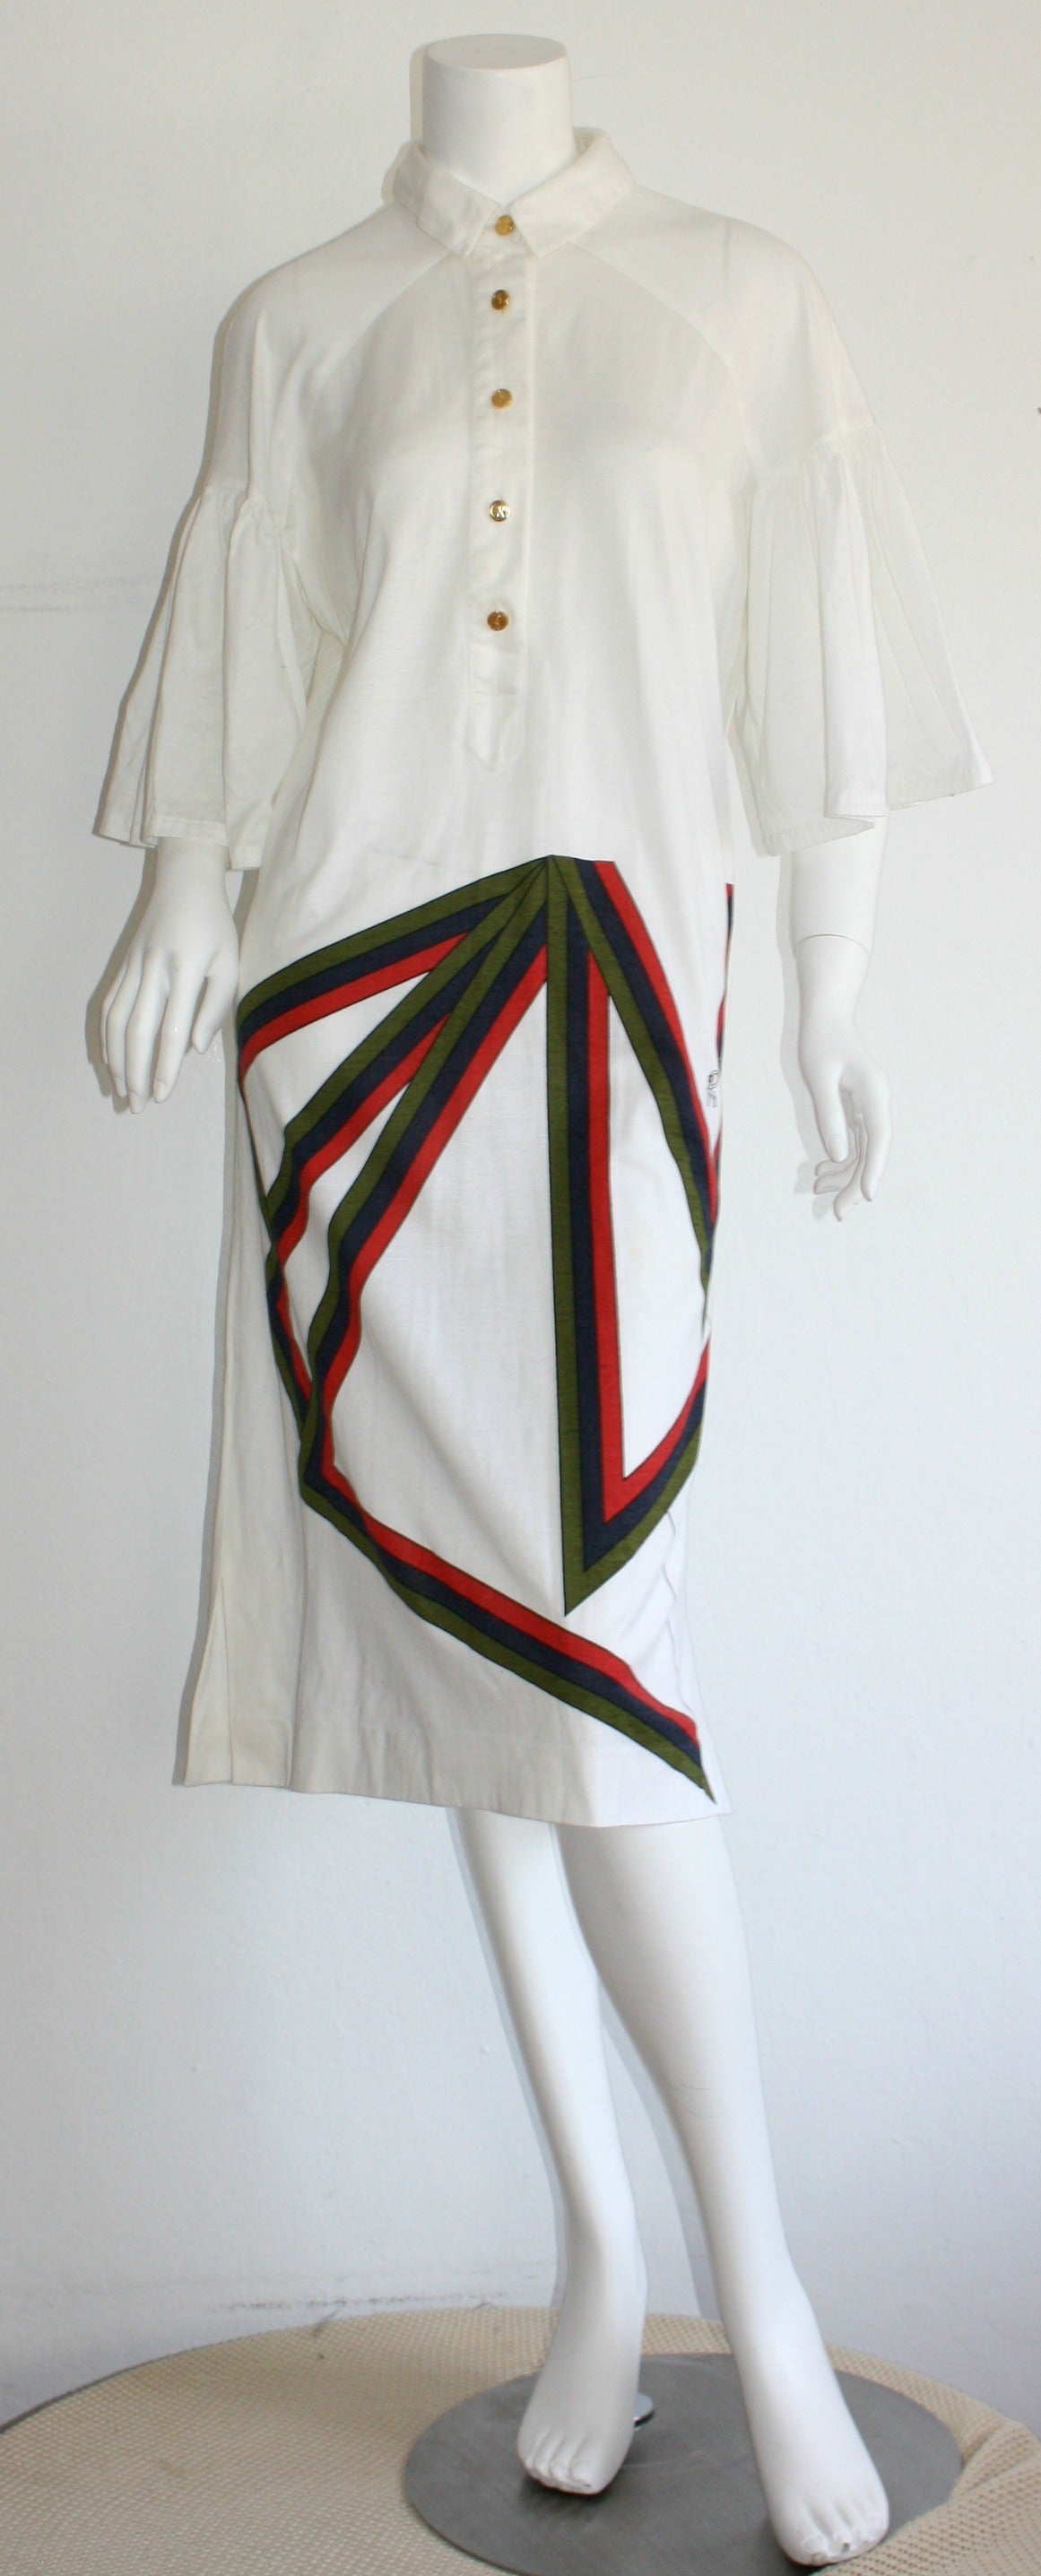 Vintage Roberta di Camarino White Geometric Shirt Dress w/ Flounce Sleeves In Excellent Condition For Sale In San Diego, CA